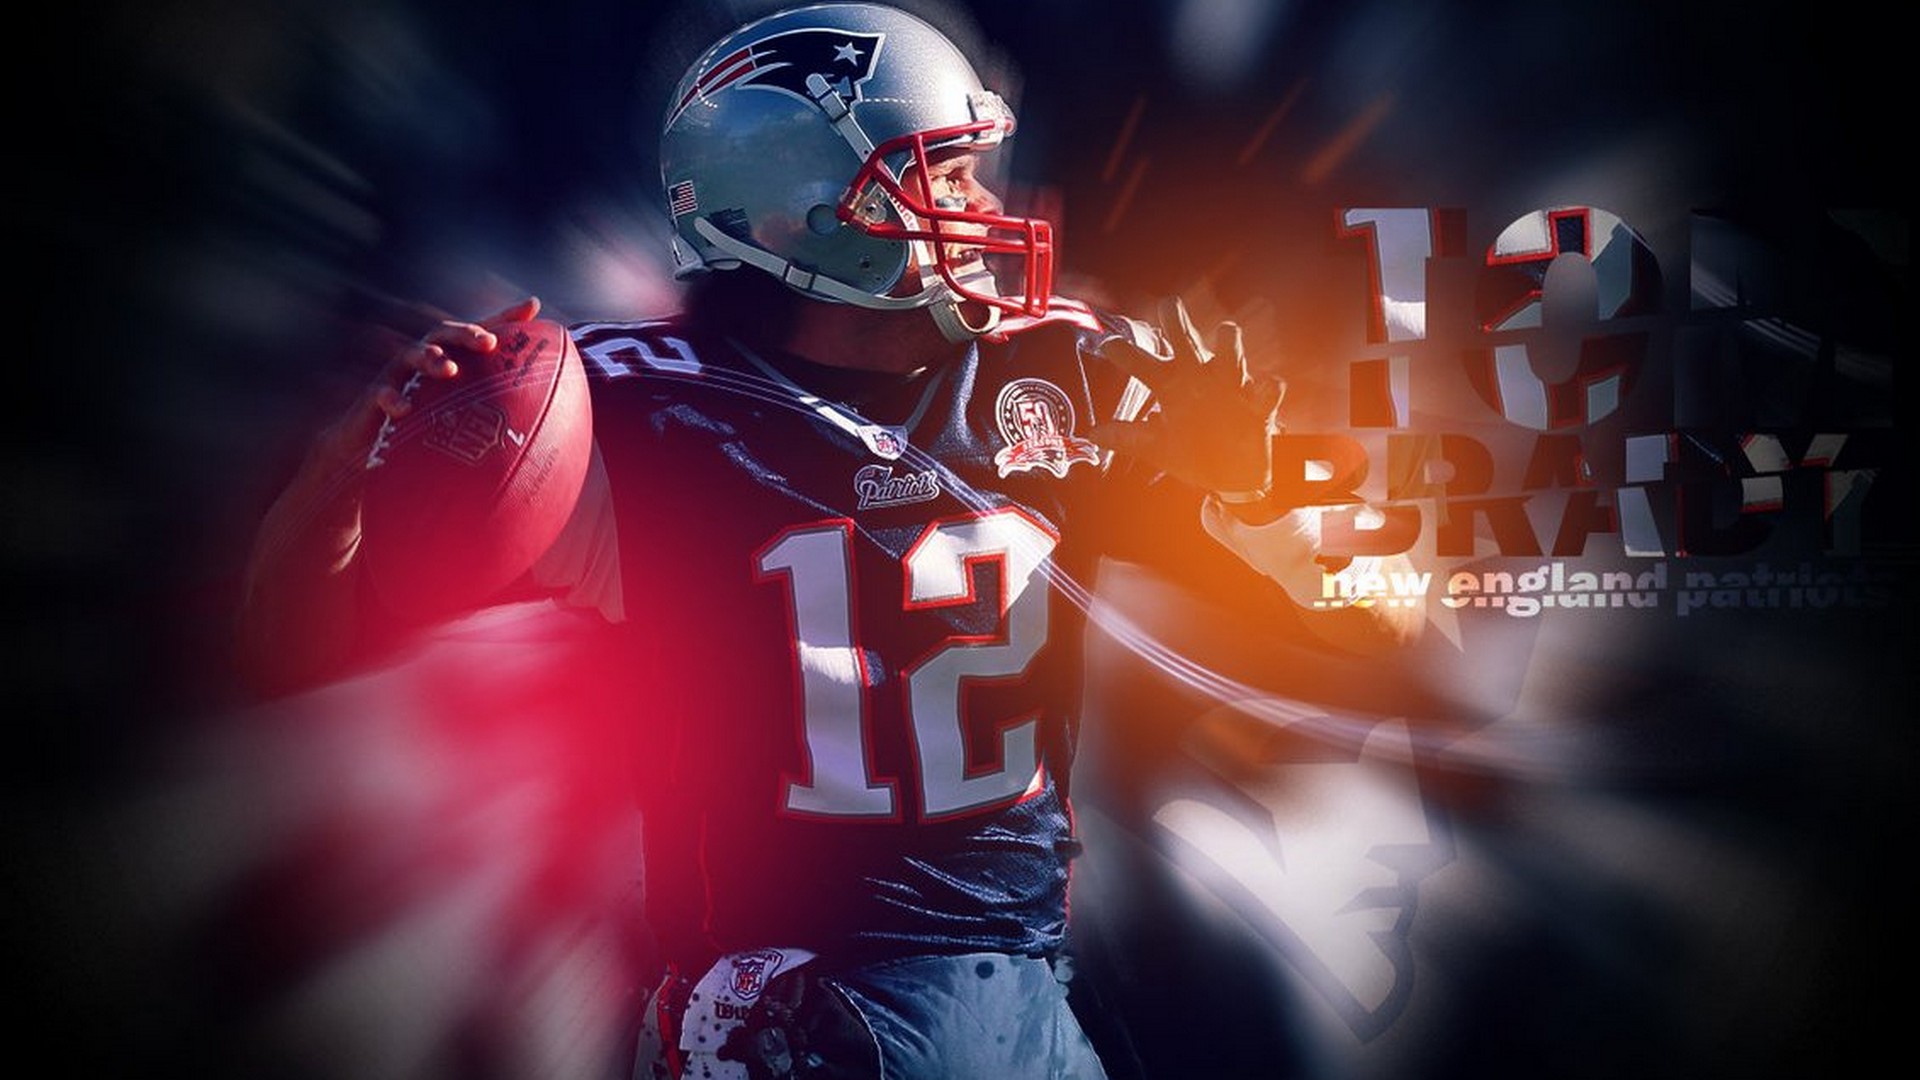 Wallpaper Tom Brady Patriots with image resolution 1920x1080 pixel. You can use this wallpaper as background for your desktop Computer Screensavers, Android or iPhone smartphones